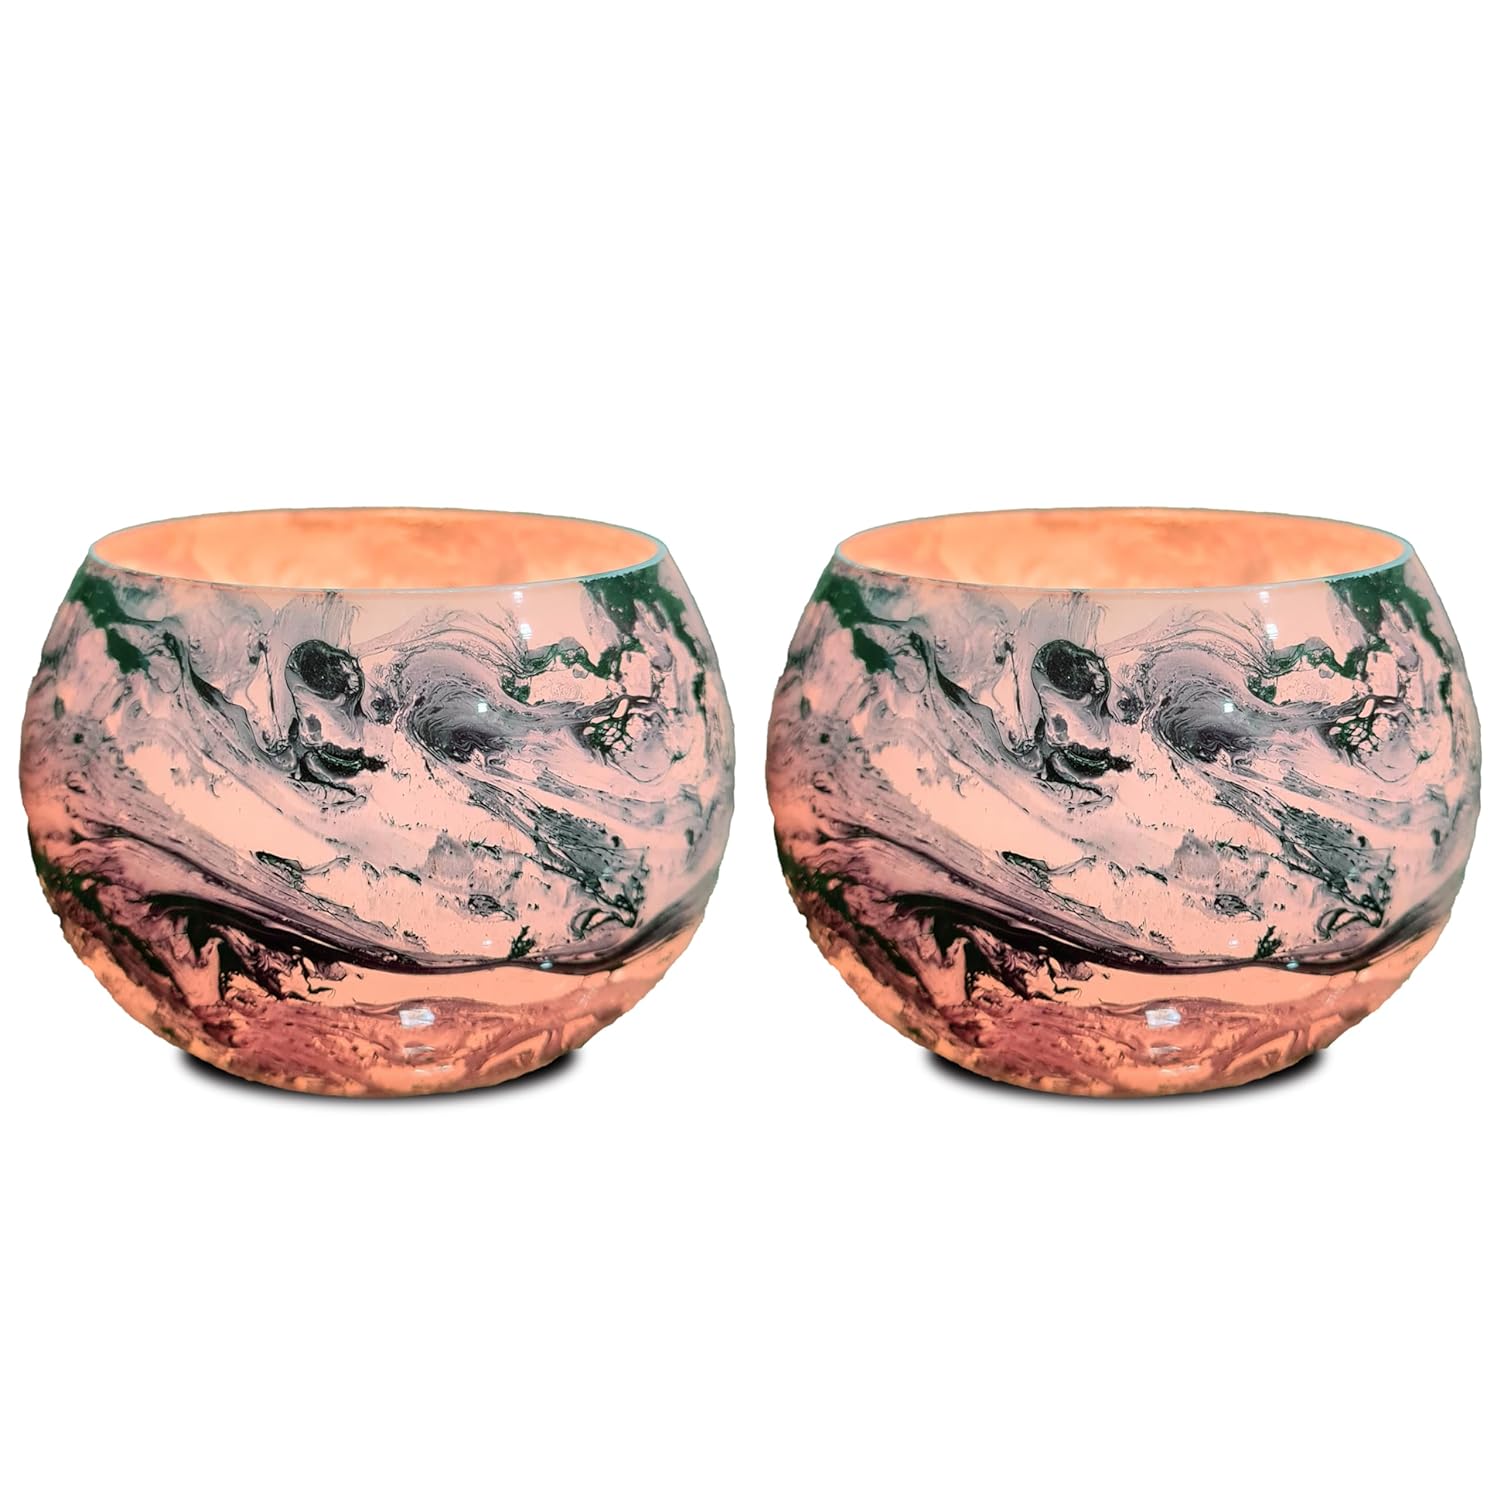 Two pink and green marble bowls on white background.